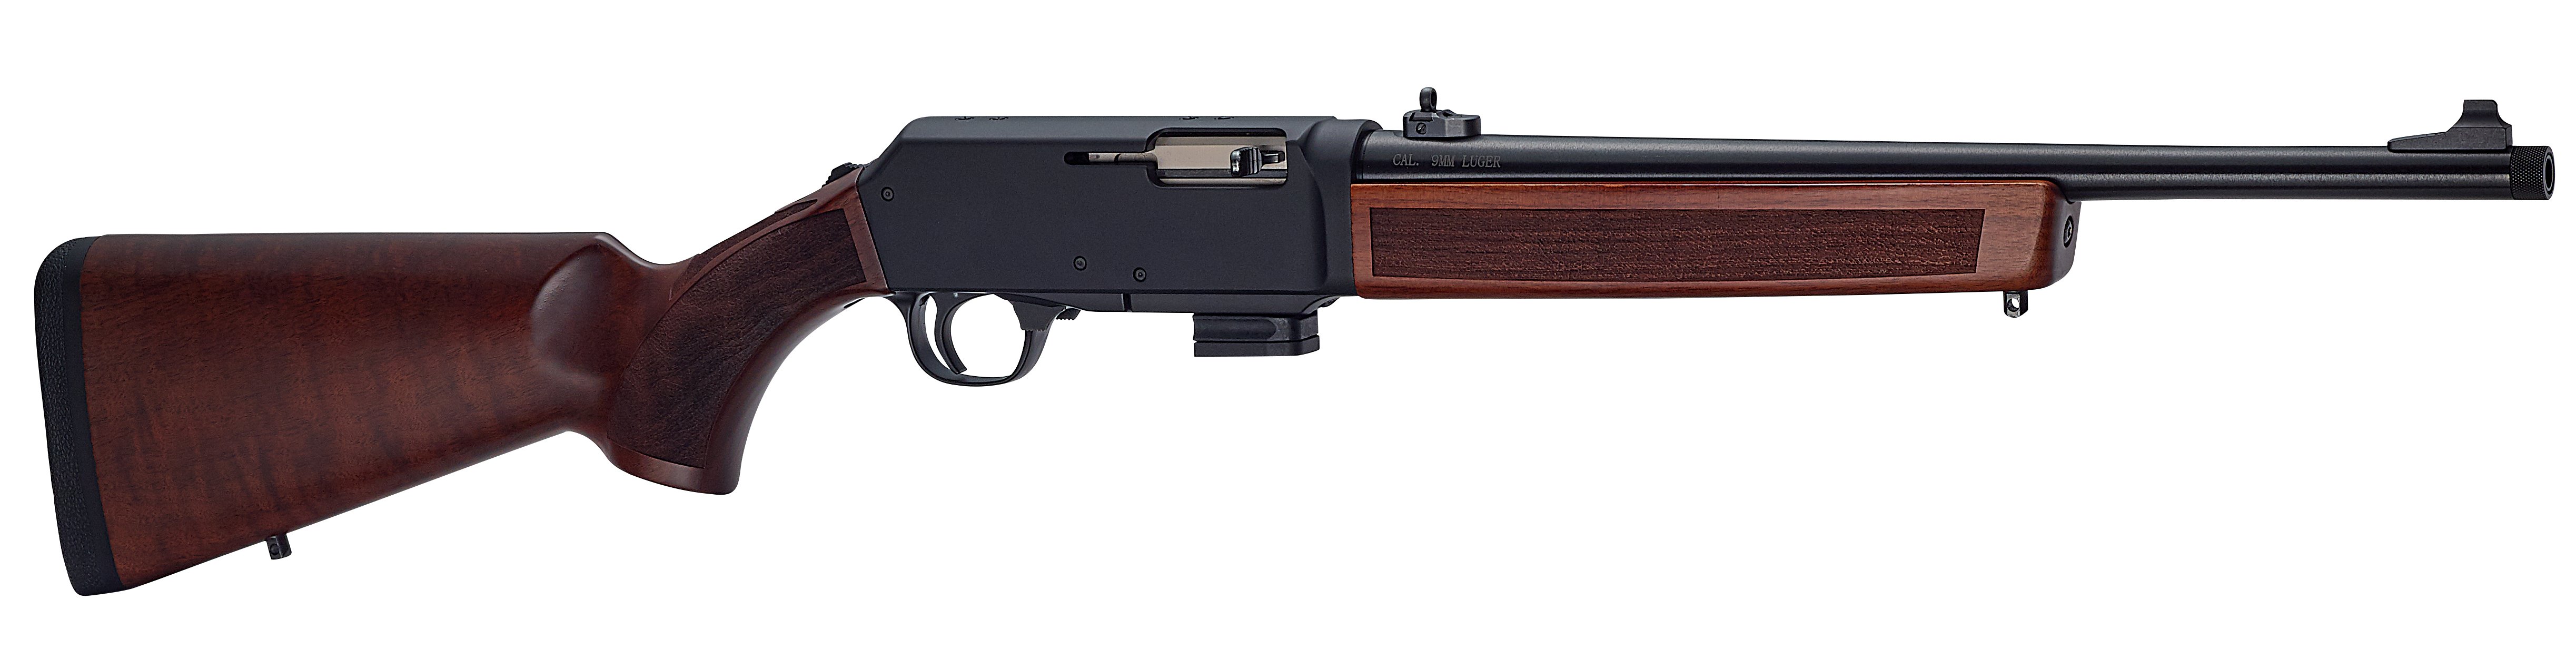 HENRY REPEATING ARMS - HOMESTEADER 9MM LUGER CARBINE SEMI-AUTO RIFLE